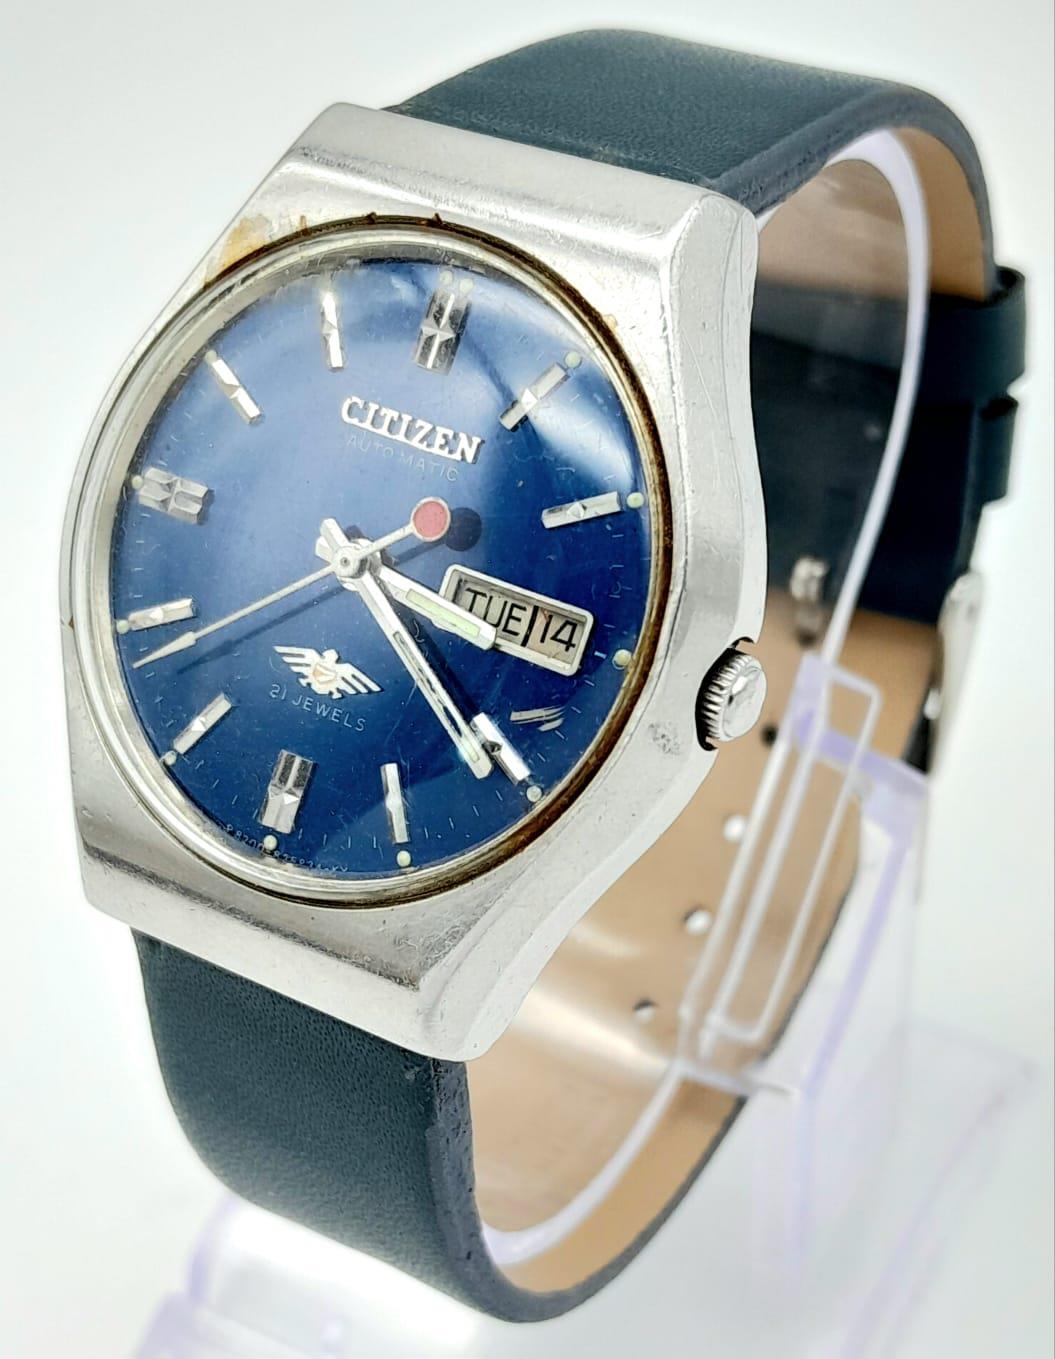 A Vintage Citizen 21 Jewel Automatic Gents Watch. Blue leather strap. Stainless steel case - 36mm.